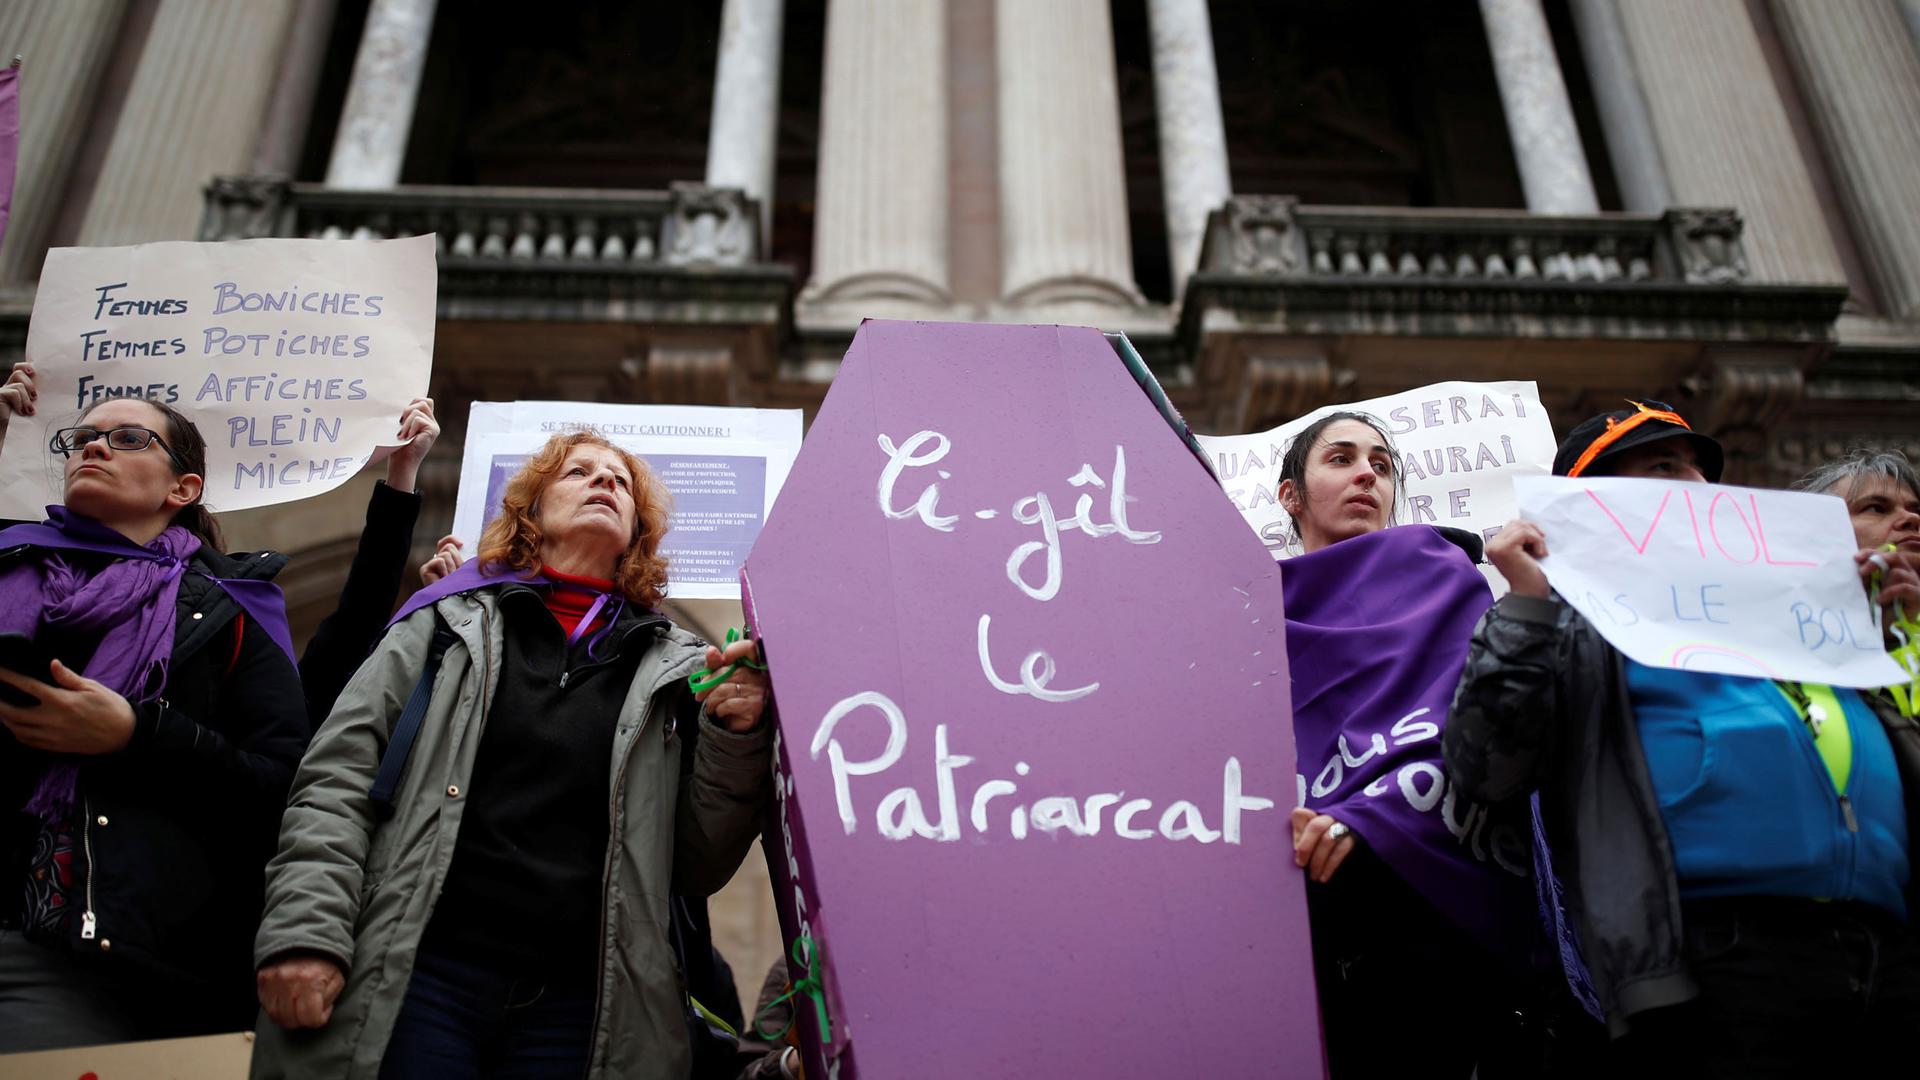 Women hold a coffin prop during a demonstration to protest femicide and violence against women in Paris.